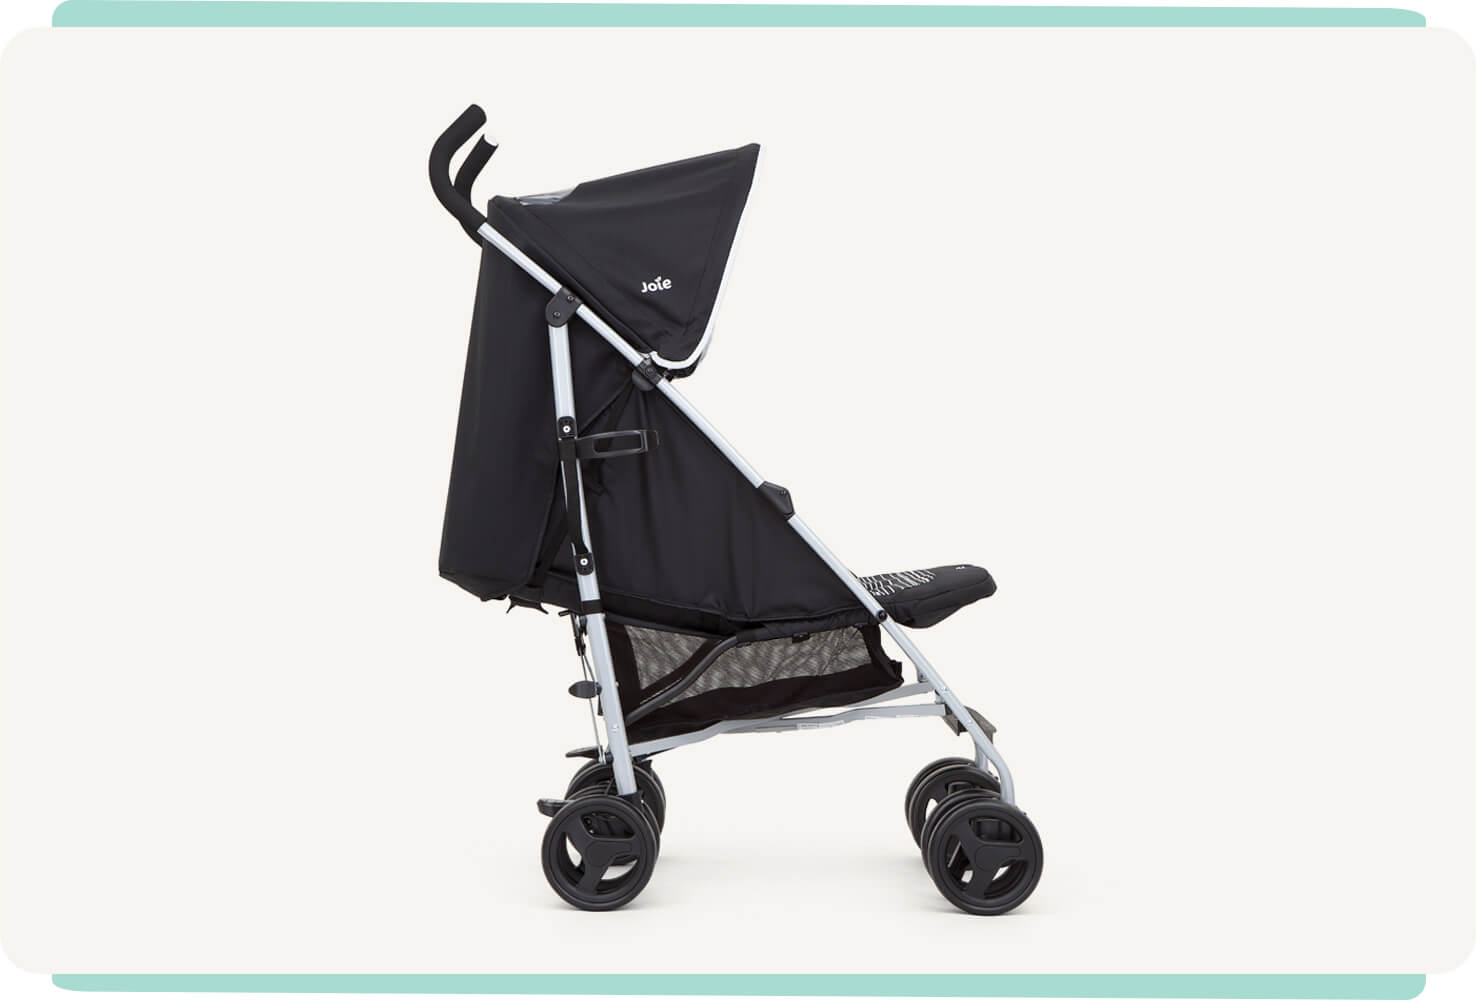   Side profile of Joie black and white rapid stroller.